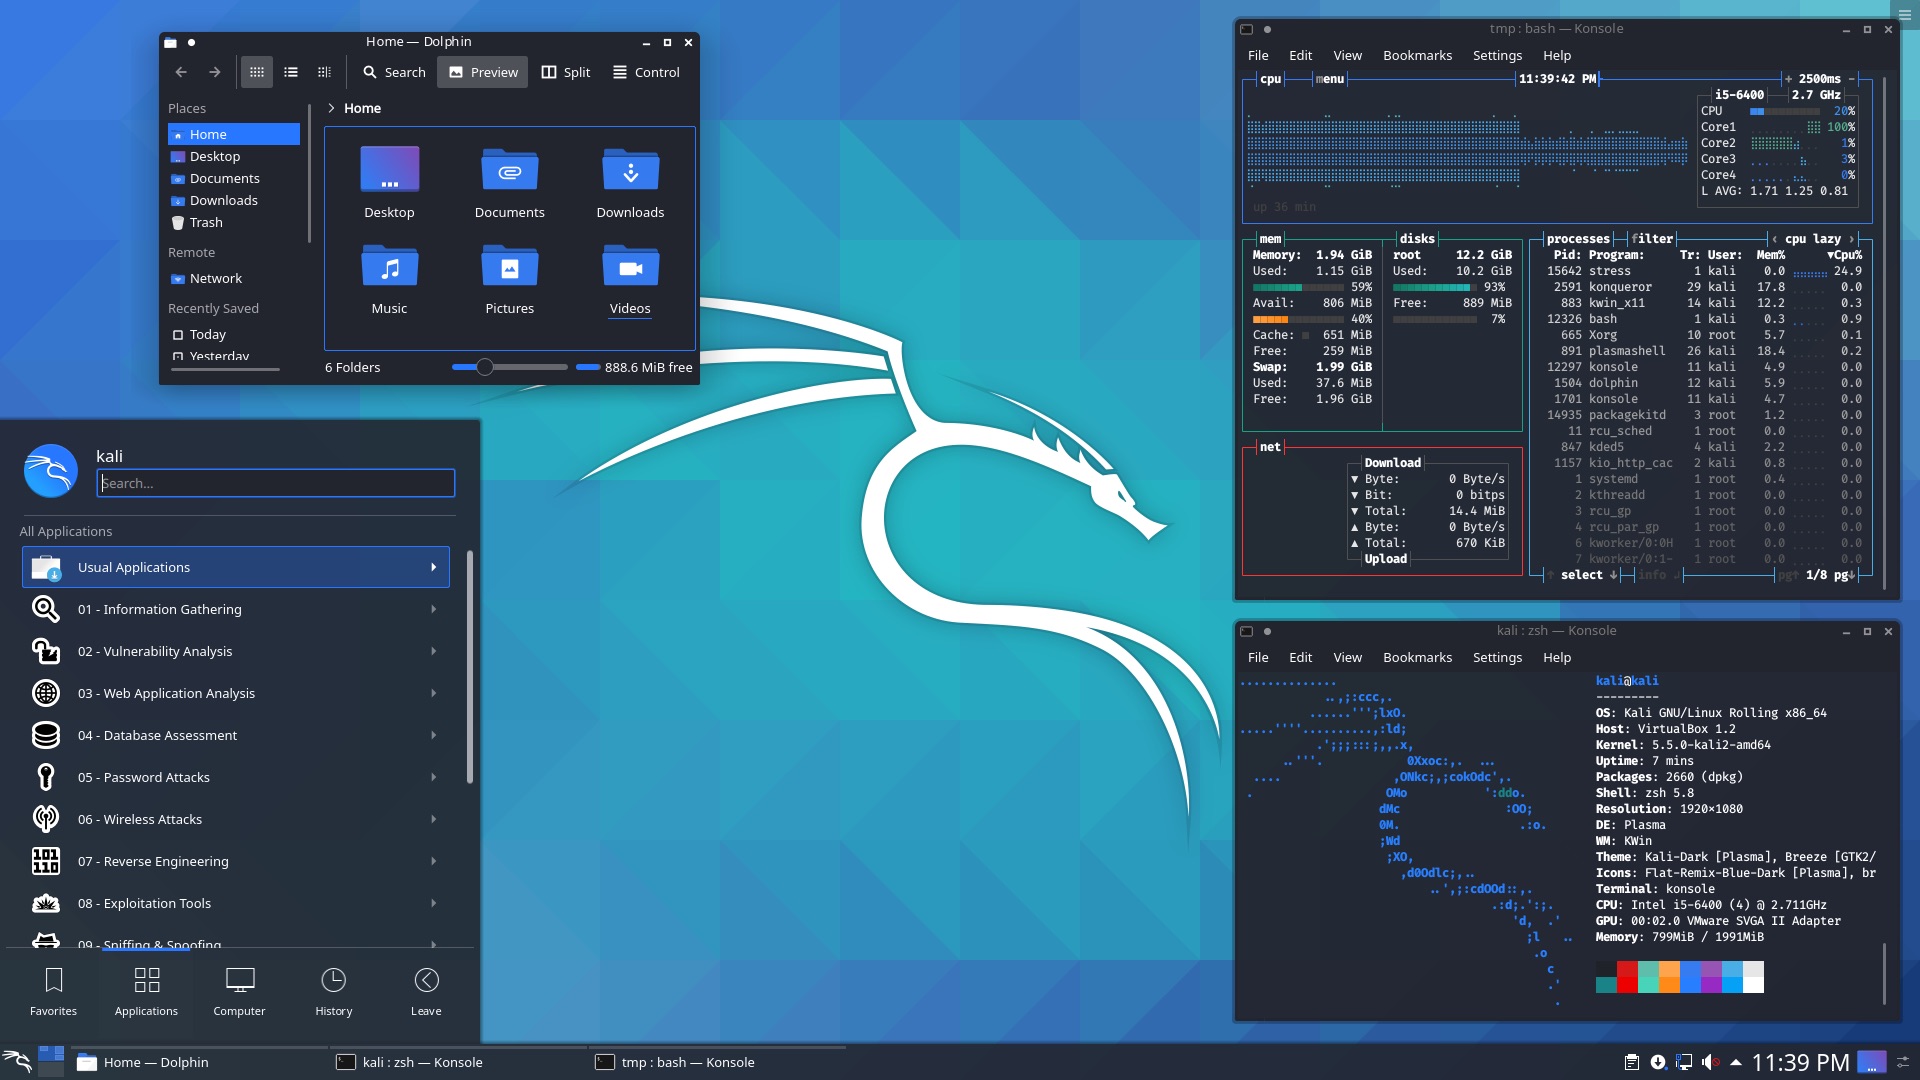 Kali Linux 2020.2 Released with GNOME 3.36, Dark and Light Themes for KDE Plasma